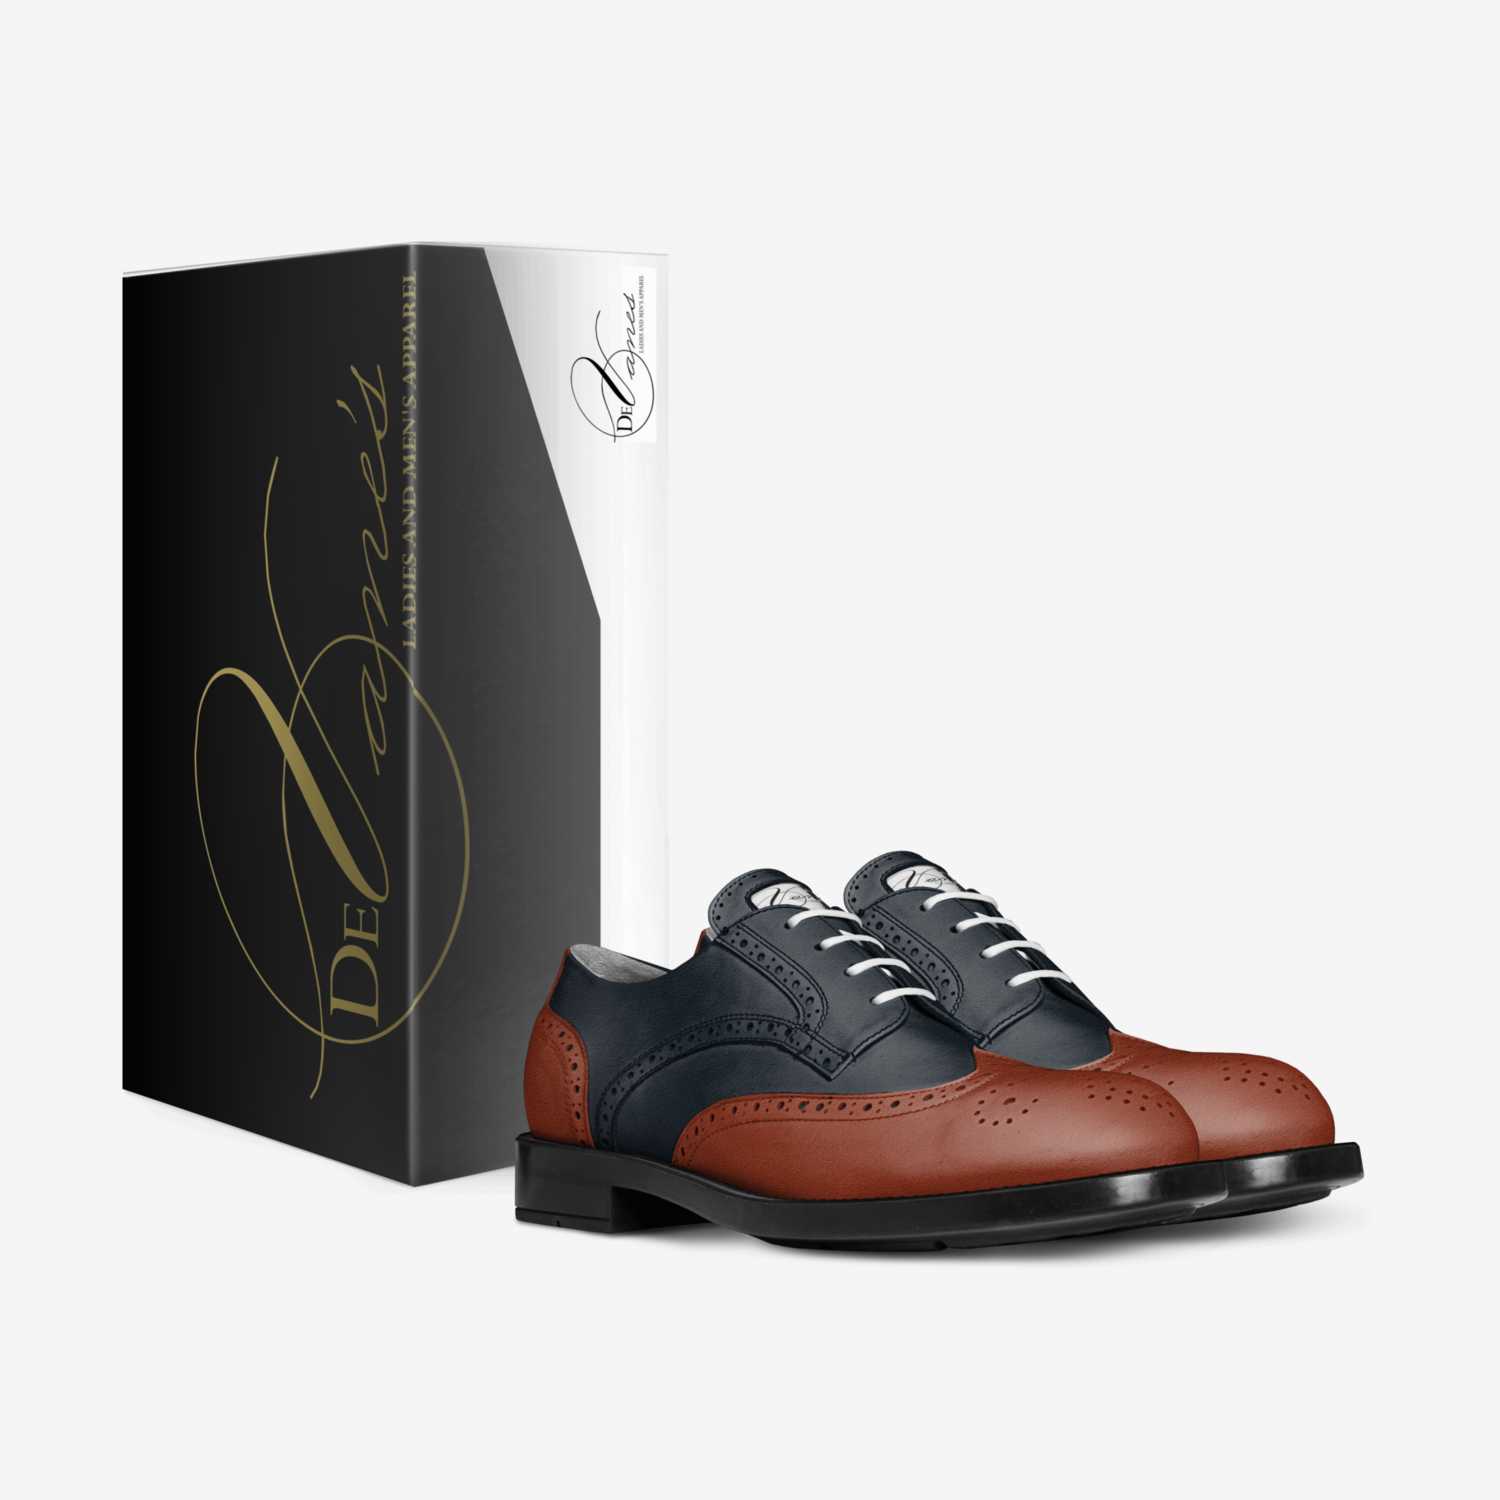 De'Vane's custom made in Italy shoes by Trevor Mcdonald | Box view